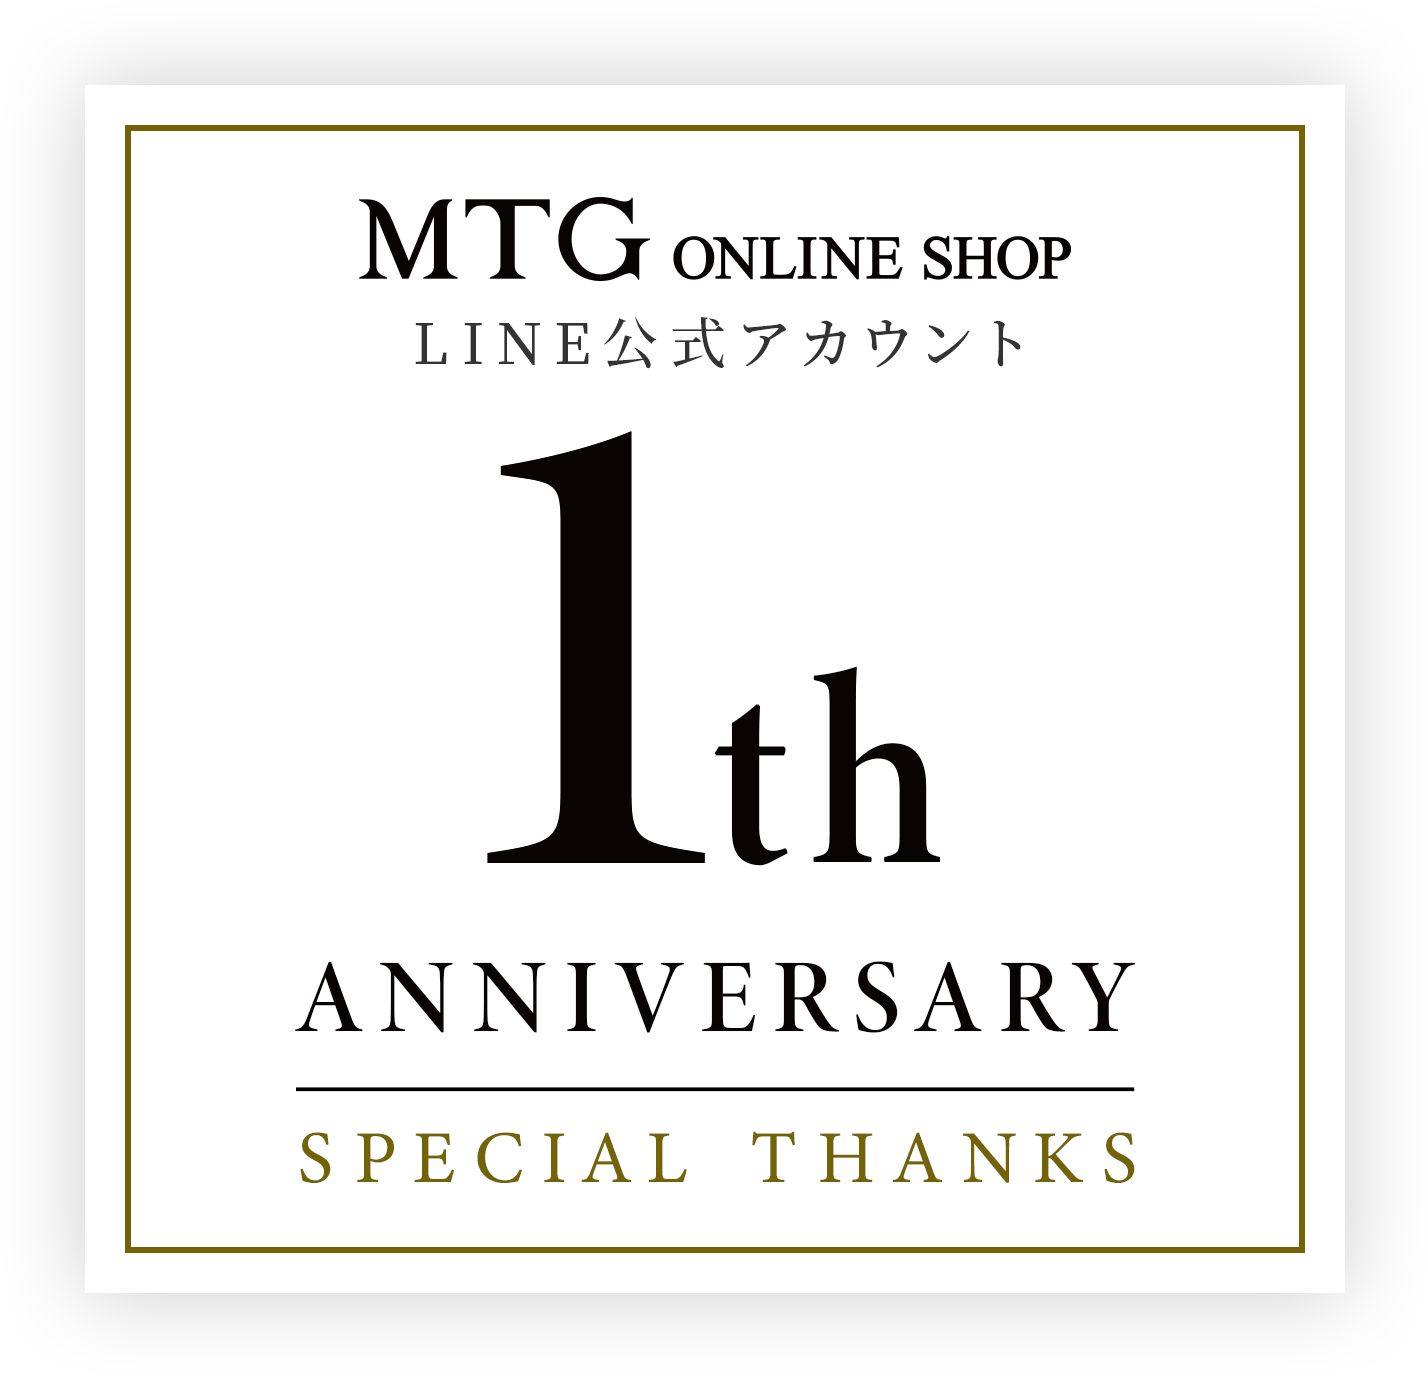 MTG ONLINESHOP LINE公式アカウント 1th ANNIVERSARY SPECIAL THANKS